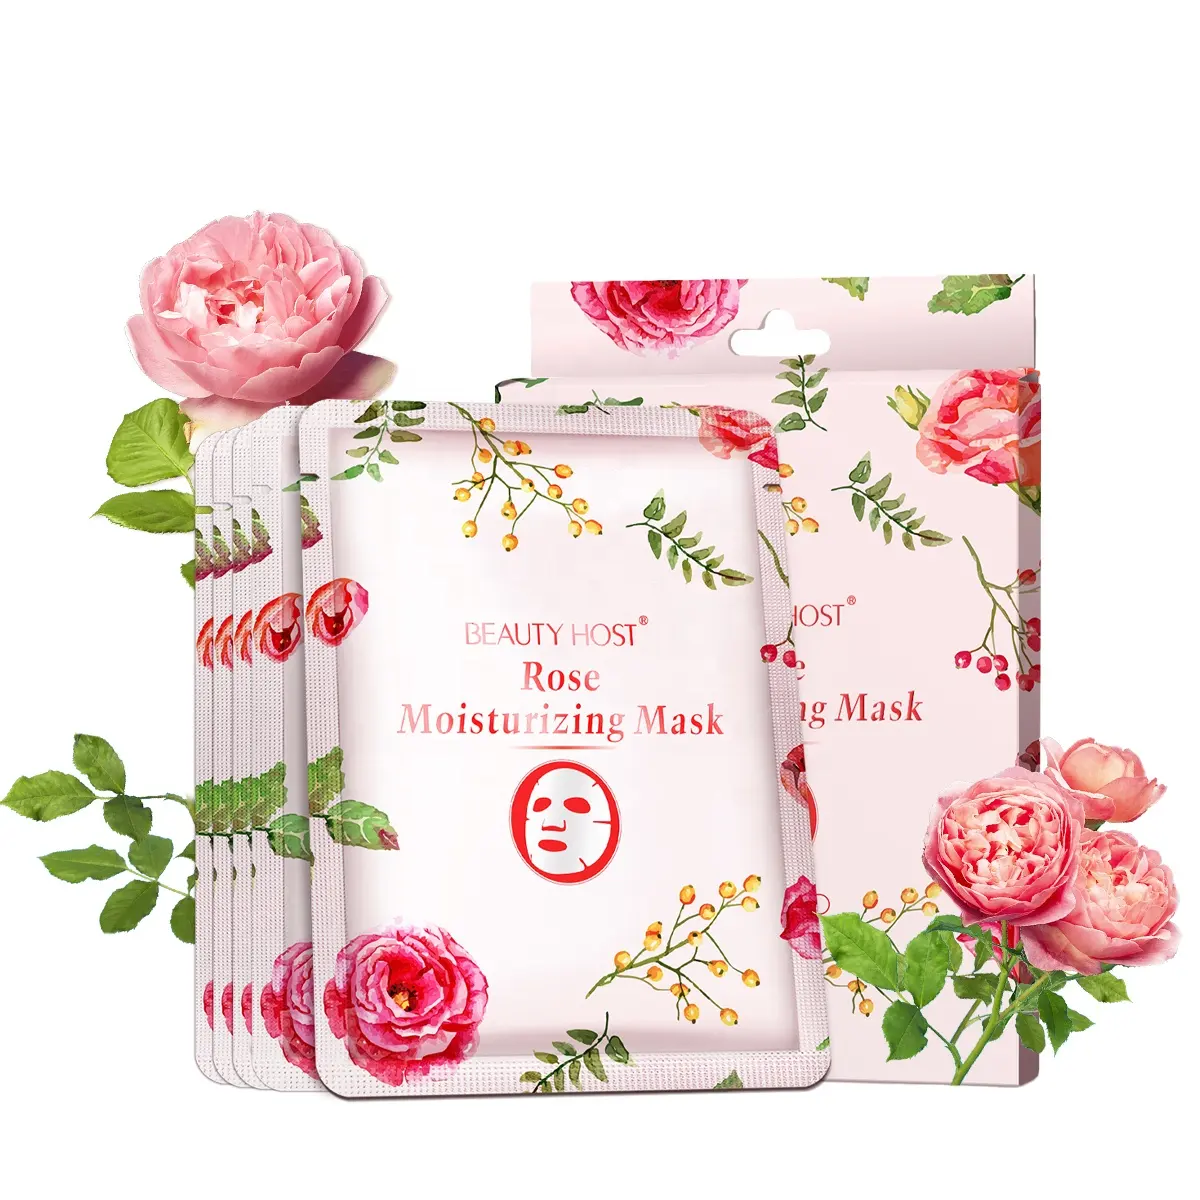 Floral Scent Rose Facial Mask Organic Rose Extract Deep Moisturizing Collagen Anti Aging Firming Soothing Skin Care For Unisex